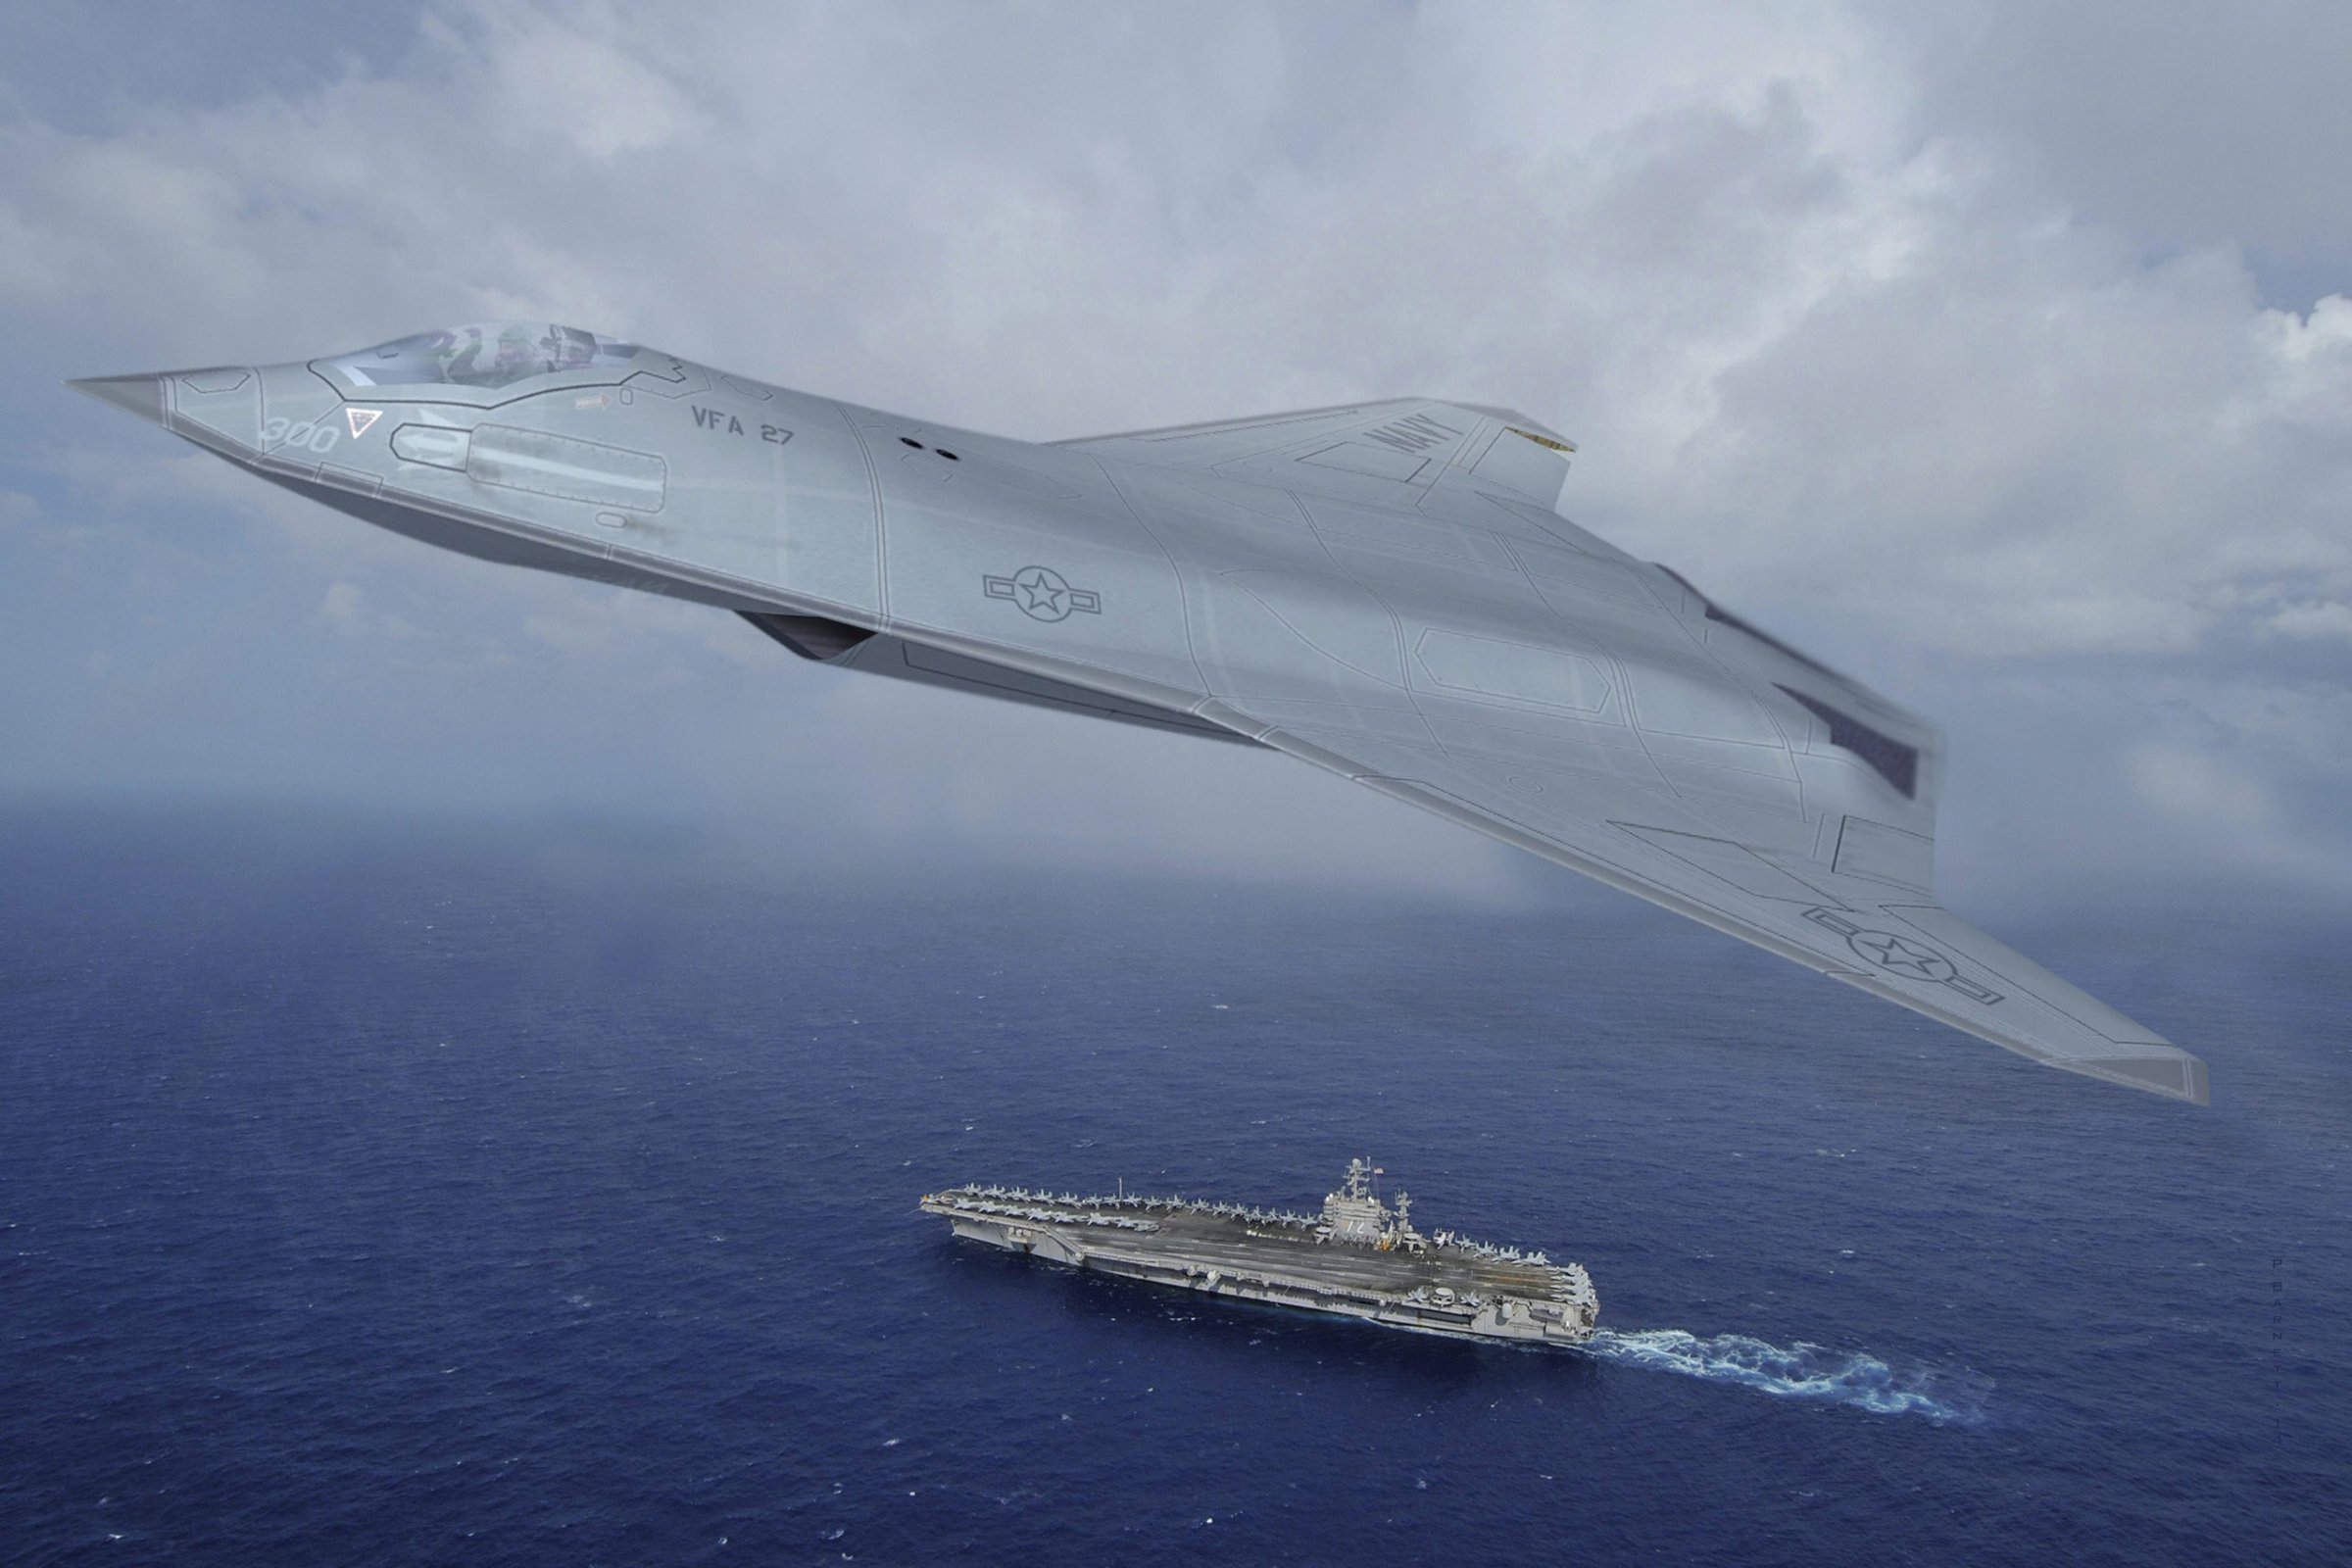 An artist's rendering of what the next generation U.S. fighter jet might look like is seen in this handout photo provided by Northrop Grumman Corporation, December 12, 2015. The Pentagon's fiscal 2017 budget request will include $12 billion to $15 billion to fund war gaming, experimentation and the demonstration of new technologies aimed at ensuring a continued military edge over China and Russia, Deputy Defense Secretary Robert Work said December 14, 2015. REUTERS/Northrop Grumman Corp/Handout via Reuters NO RESALES. NO ARCHIVE. FOR EDITORIAL USE ONLY. NOT FOR SALE FOR MARKETING OR ADVERTISING CAMPAIGNS TPX IMAGES OF THE DAY